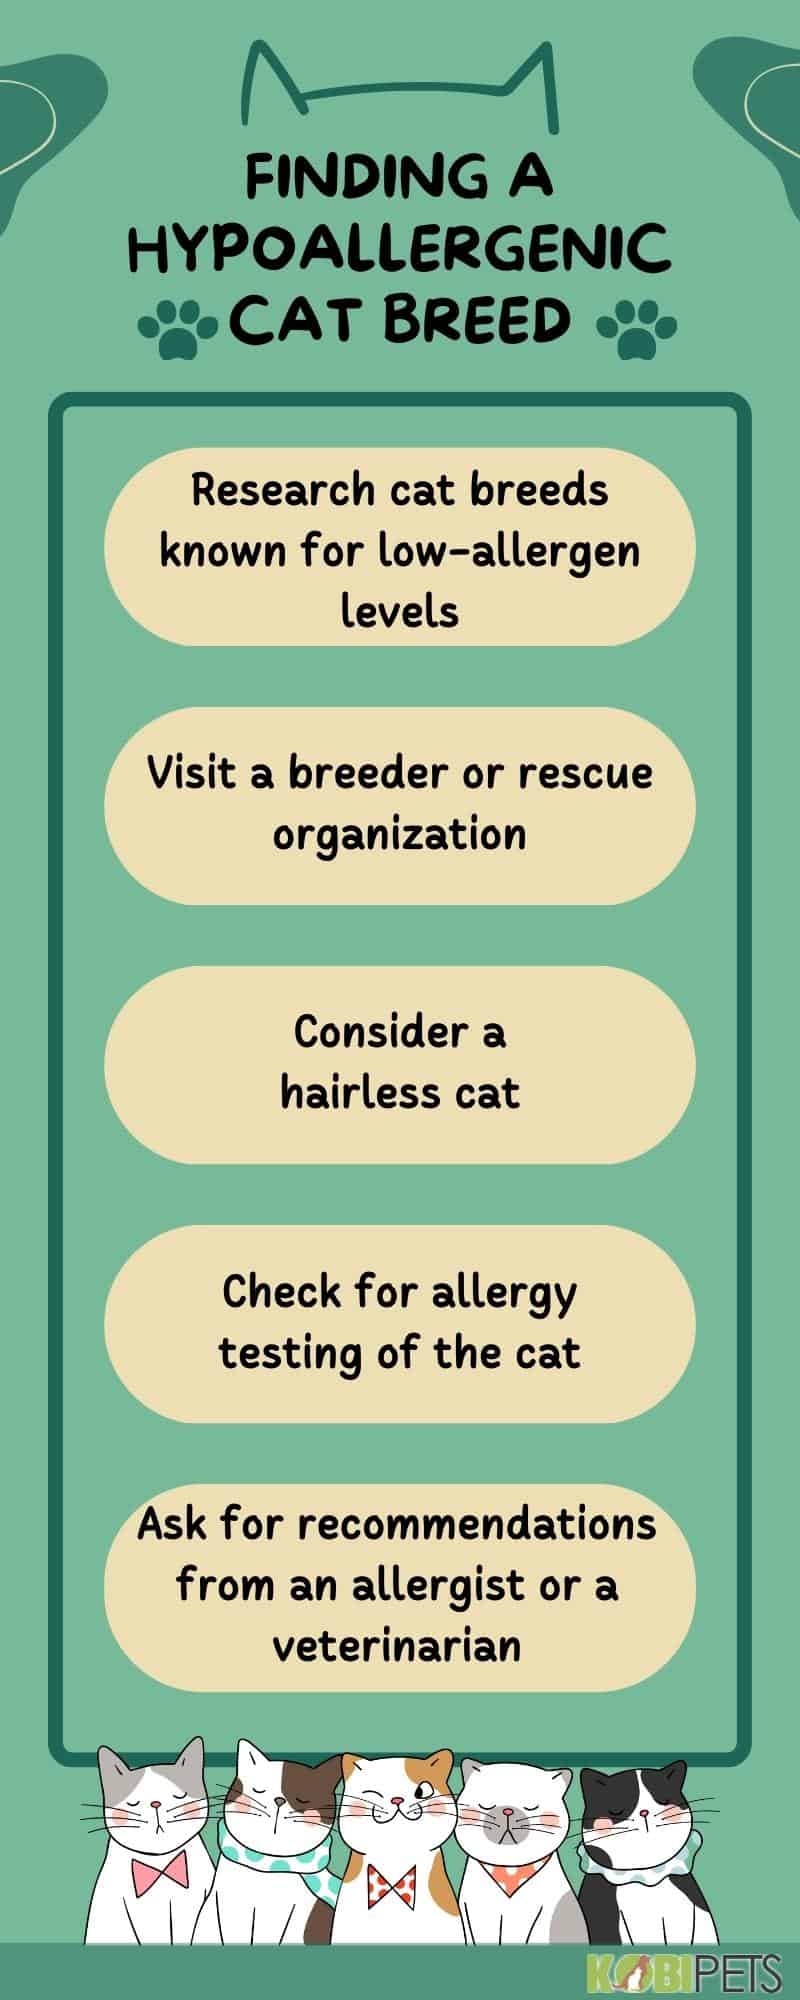 Finding a Hypoallergenic Cat Breed